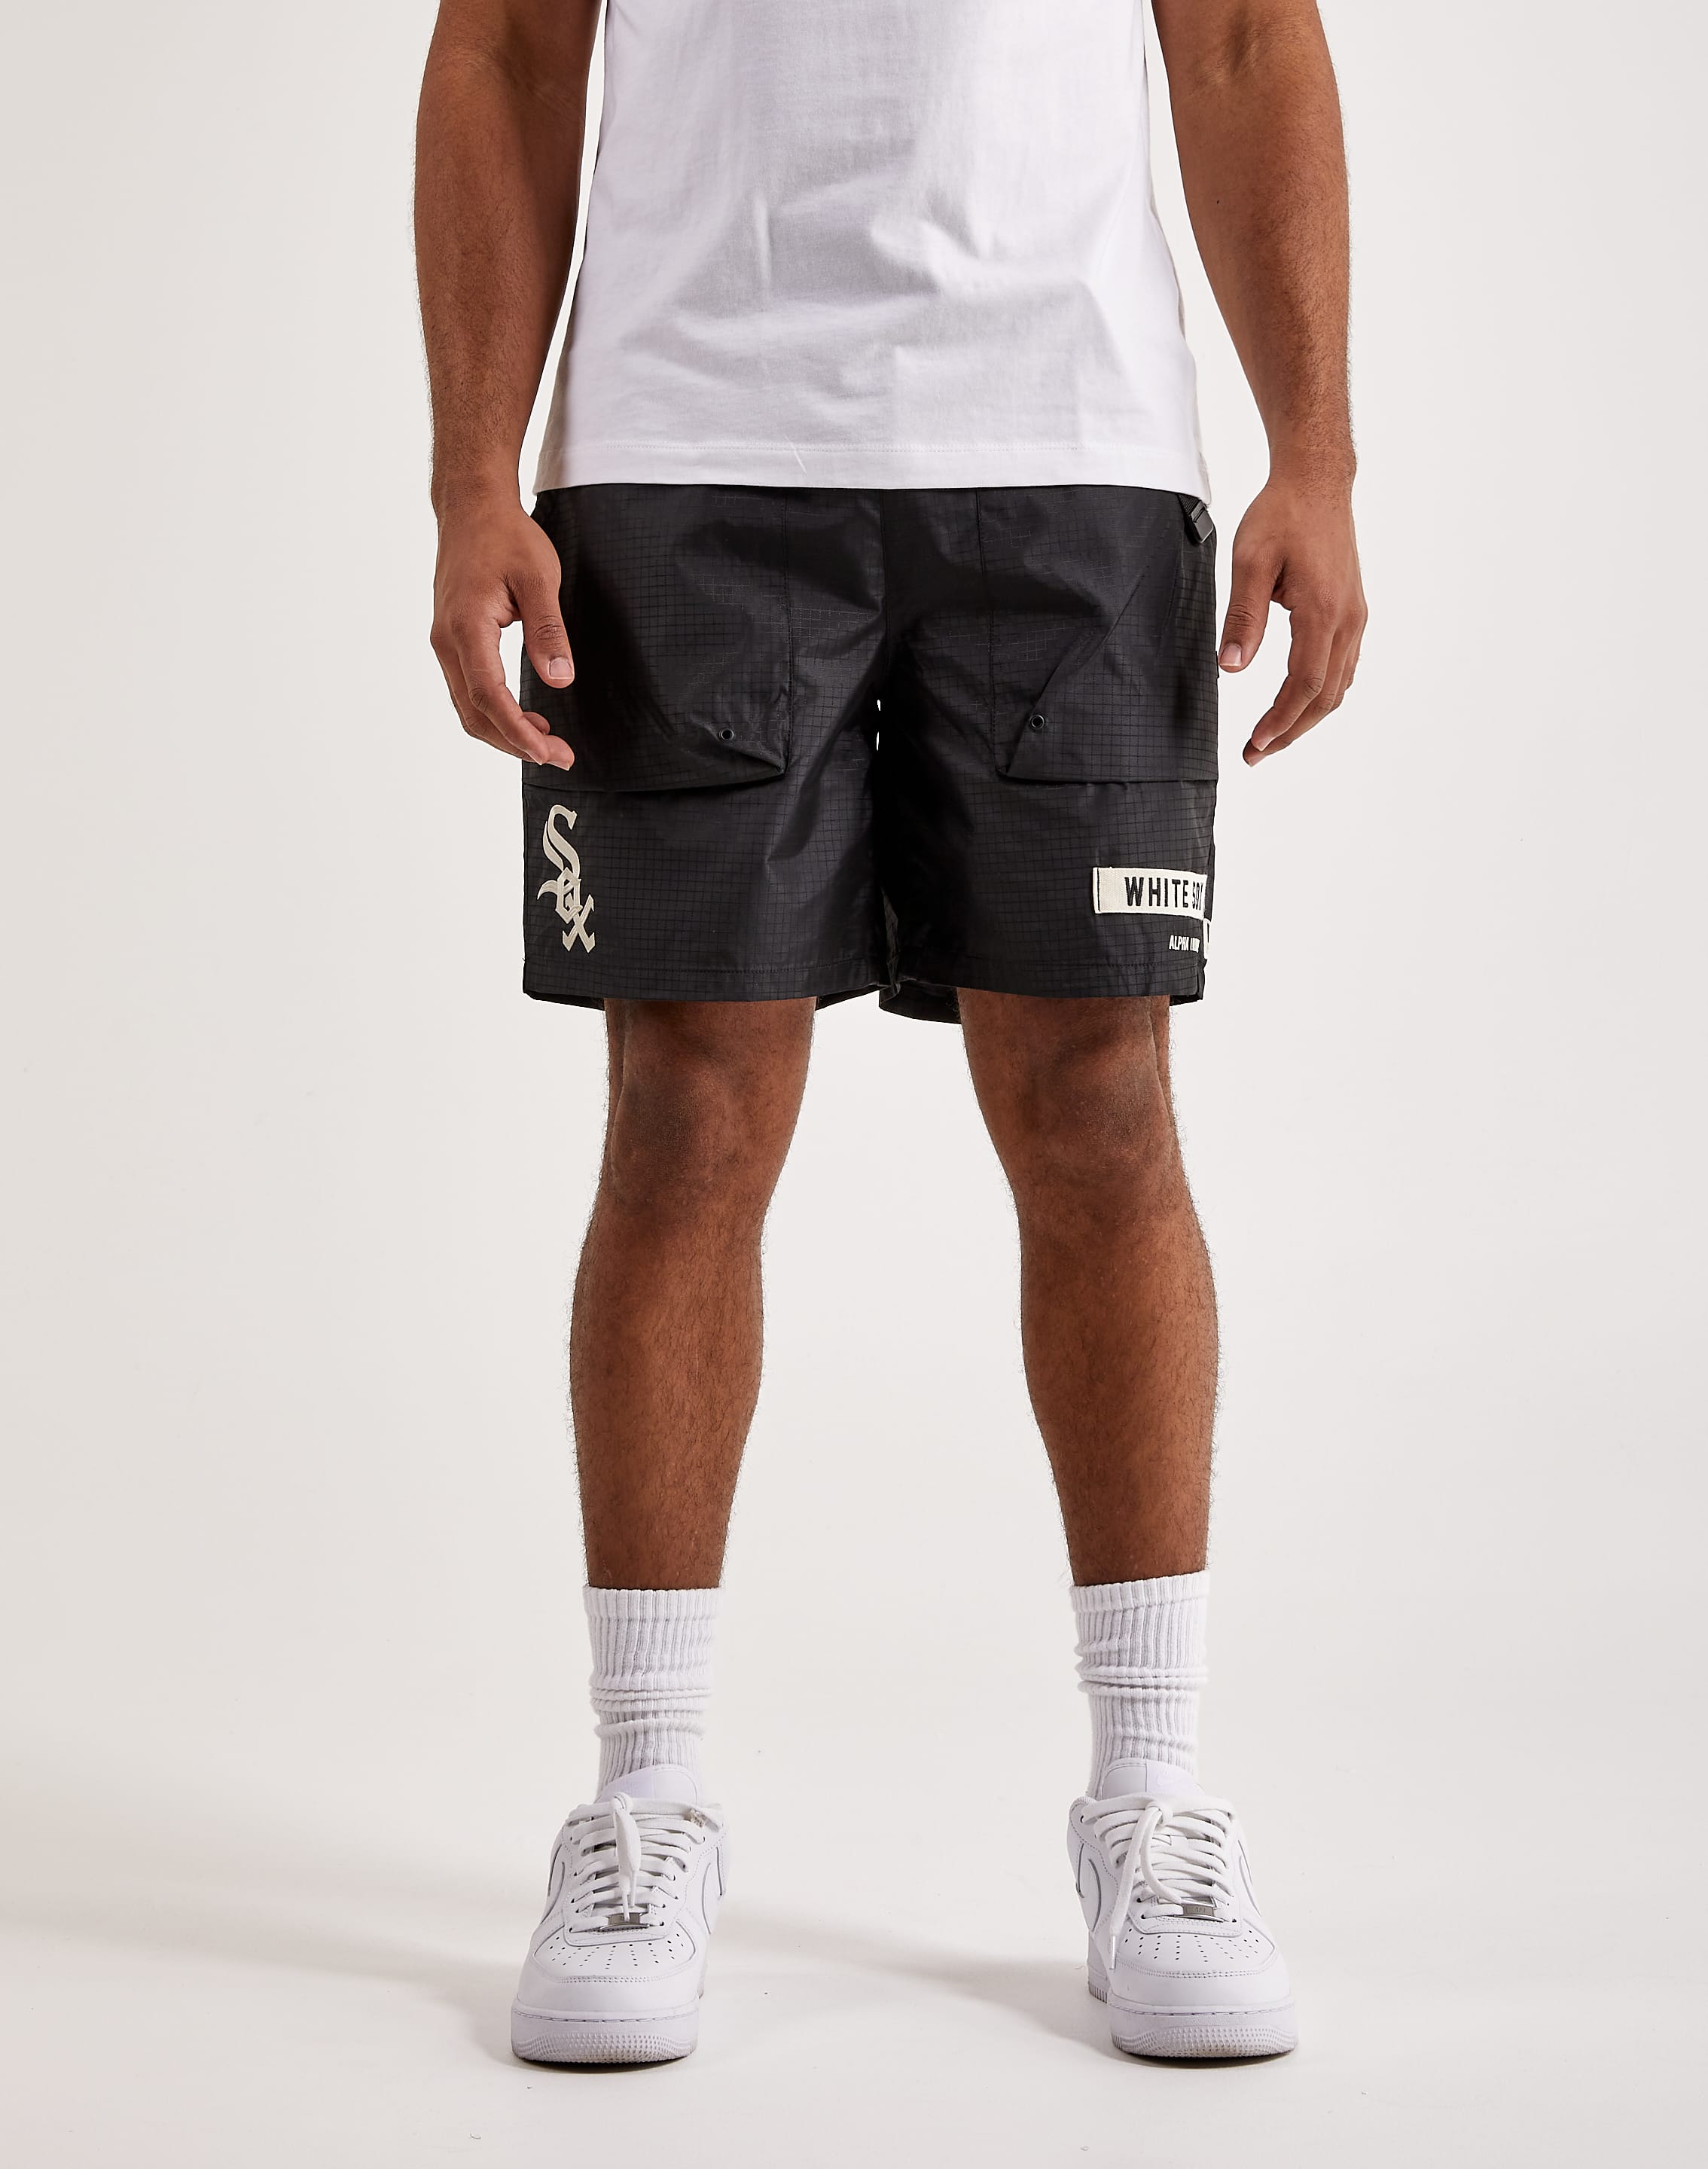 Alpha Industries – Shorts Sox White DTLR Chicago